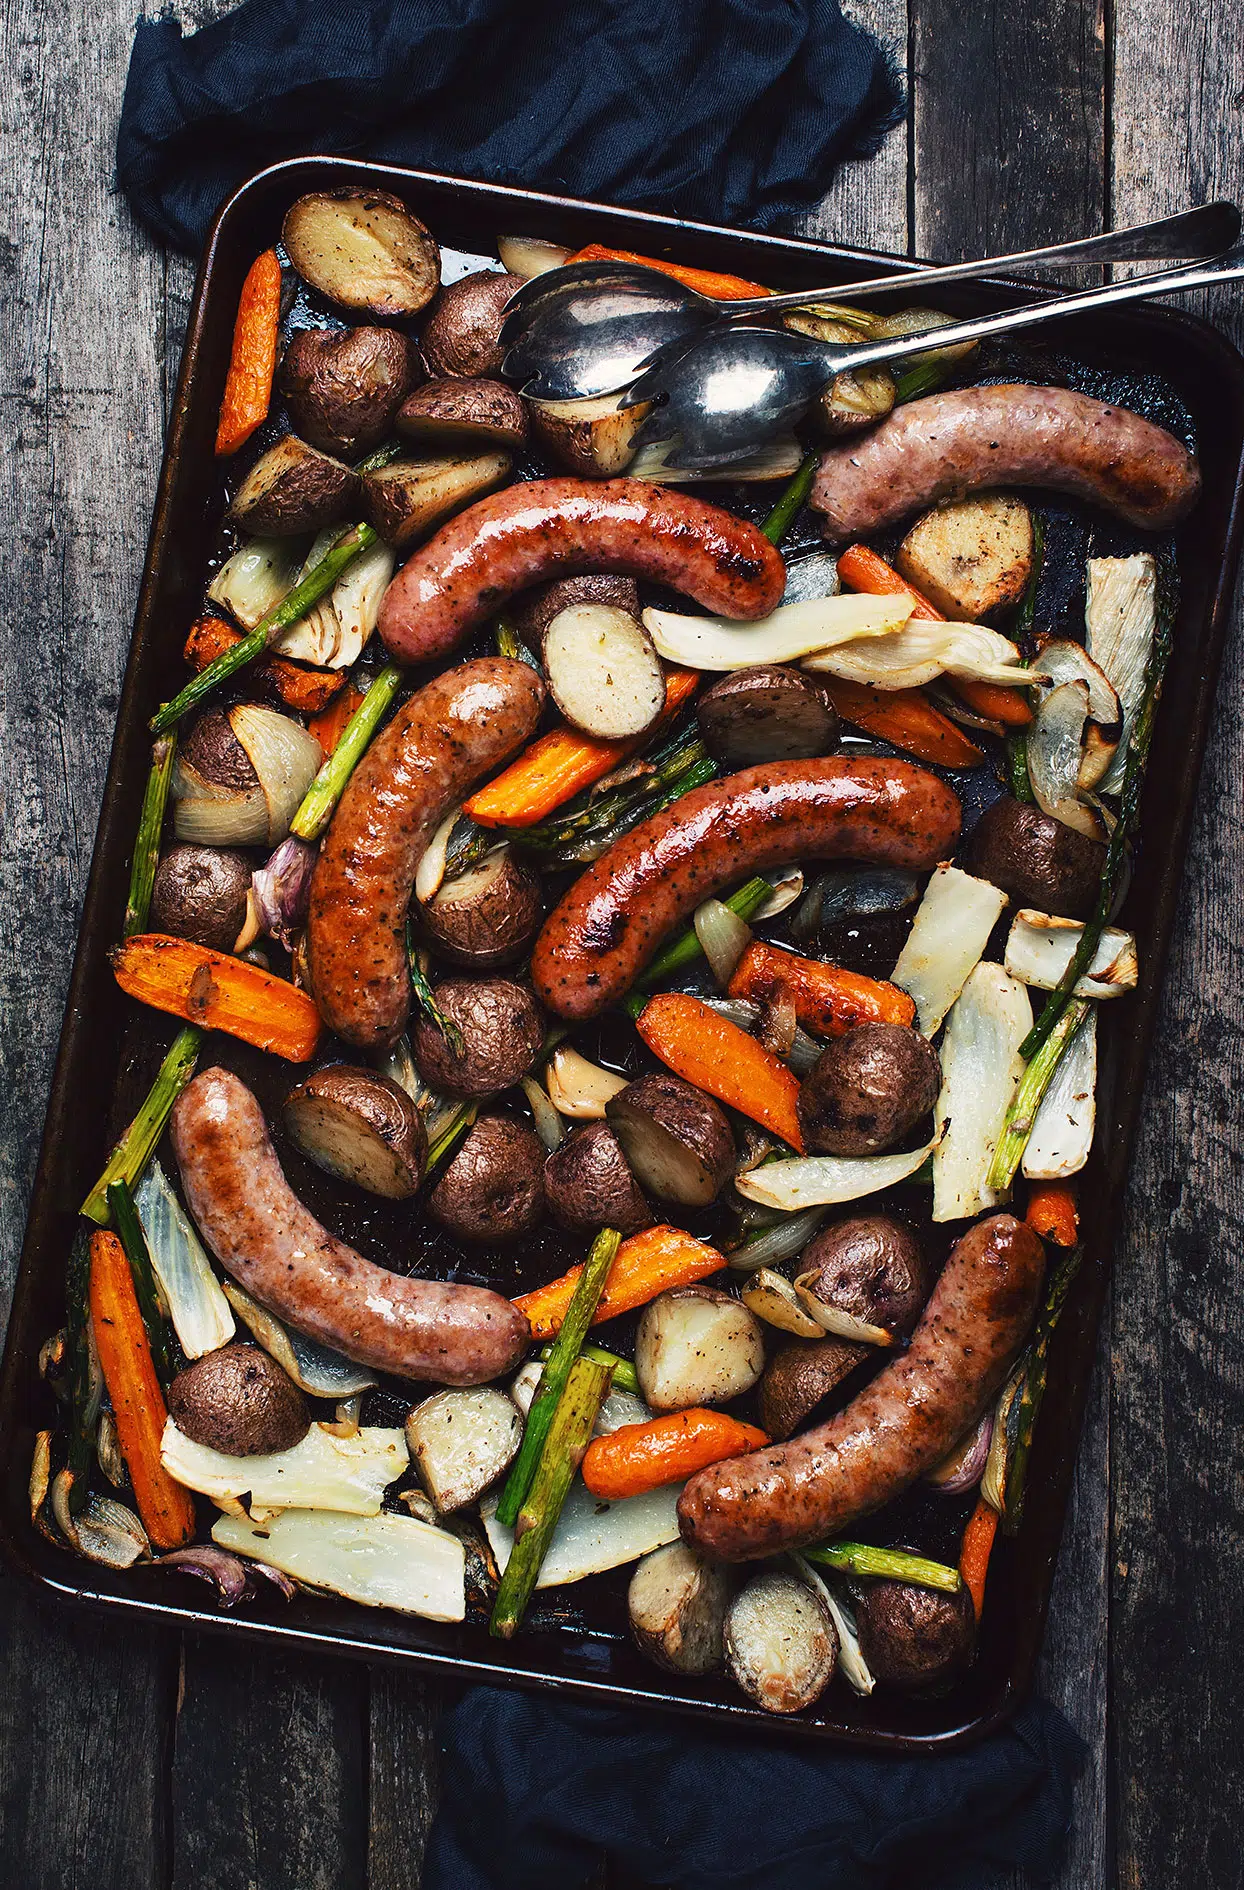 Grilled vegetables and sausages pan